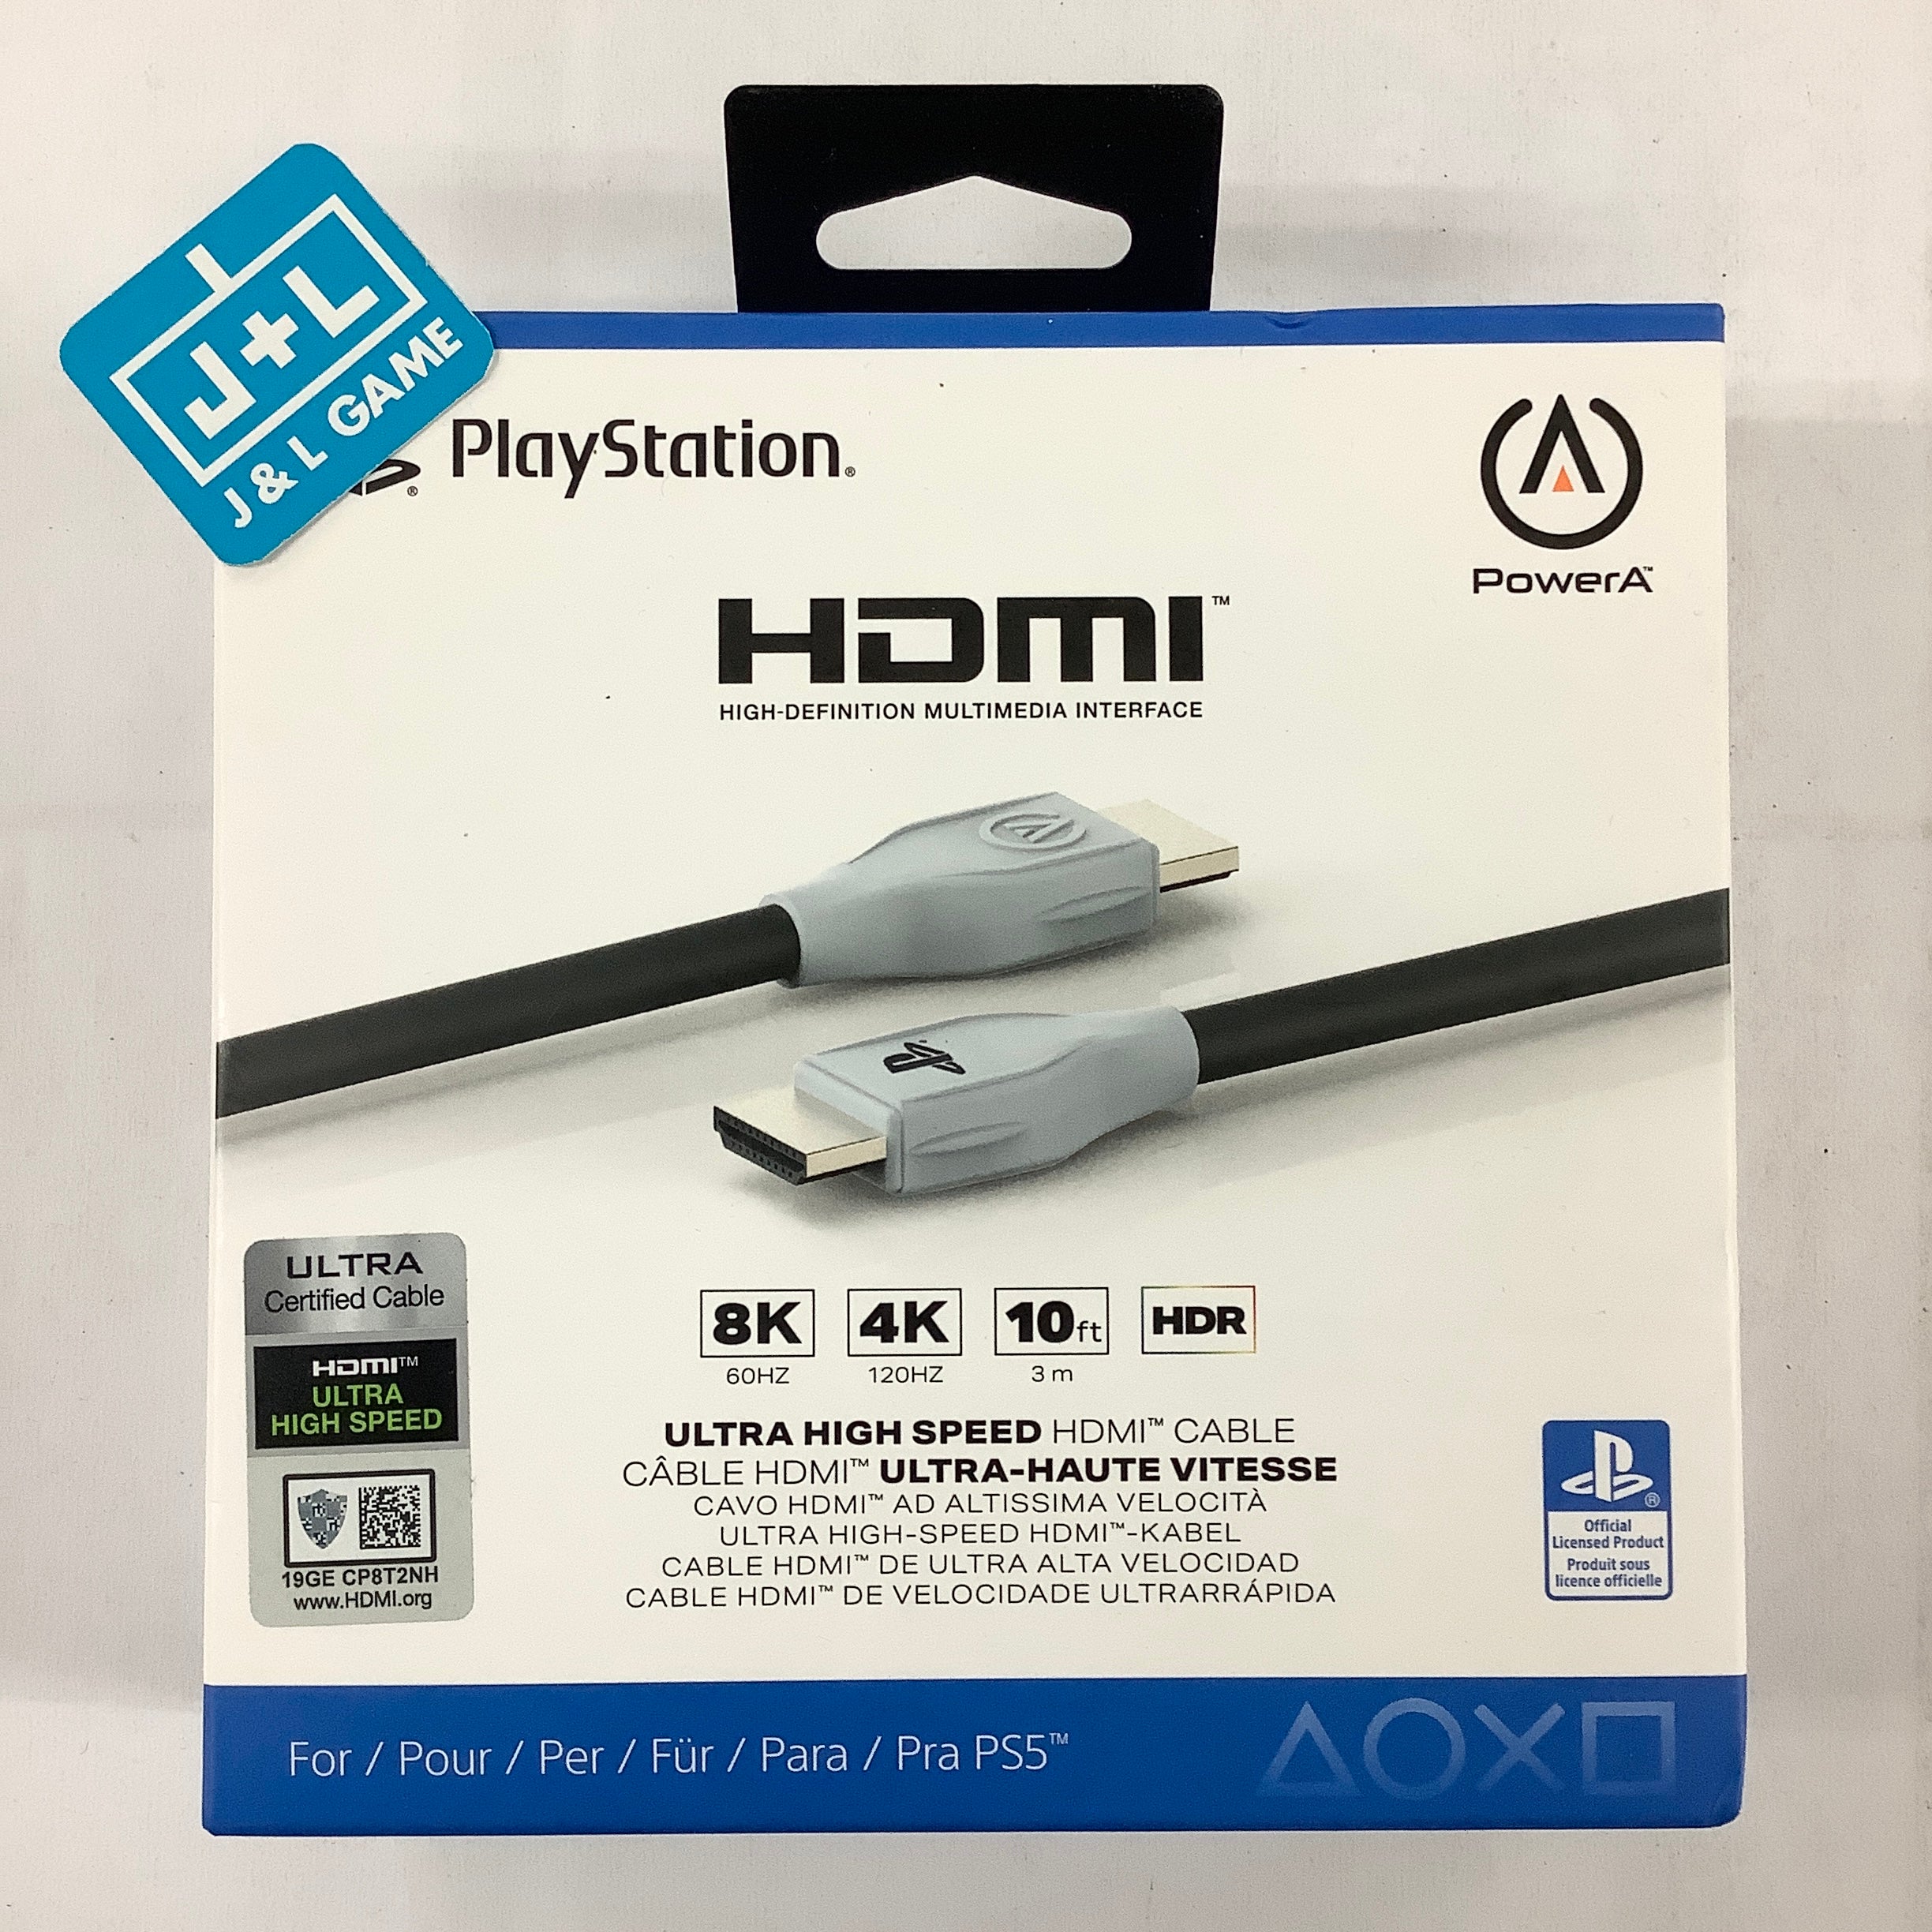 PowerA Ultra High Speed HDMI Cable - (PS5) PlayStation 5 Accessories PowerA   